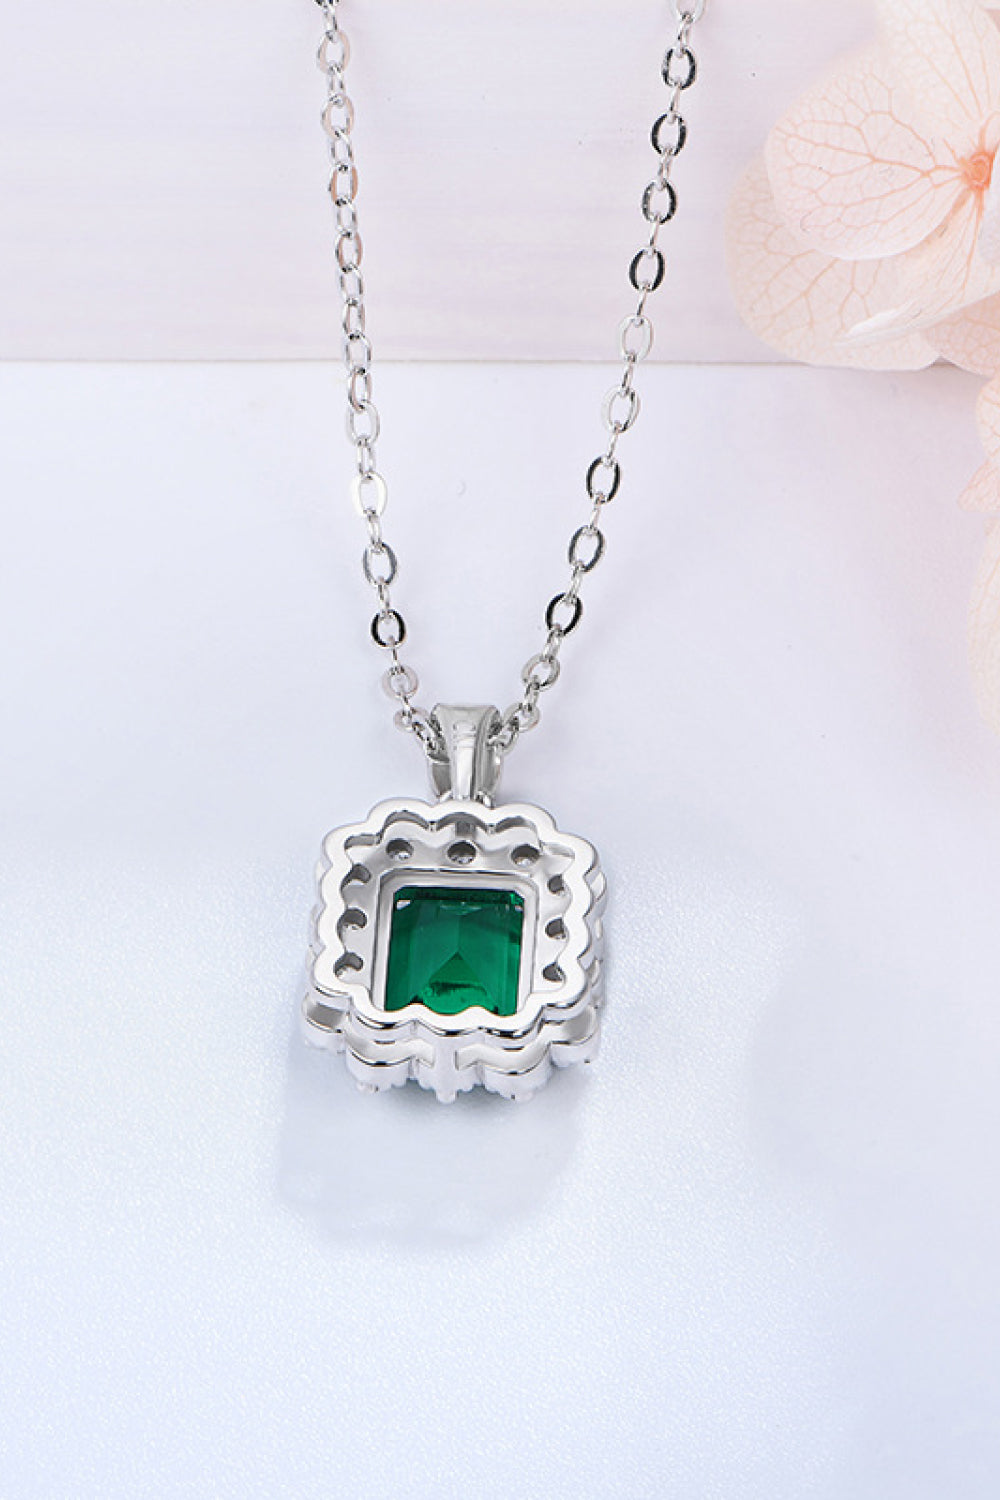 Women’s 1.5 Carat Lab-Grown Emerald Pendant 925 Sterling Silver Necklace